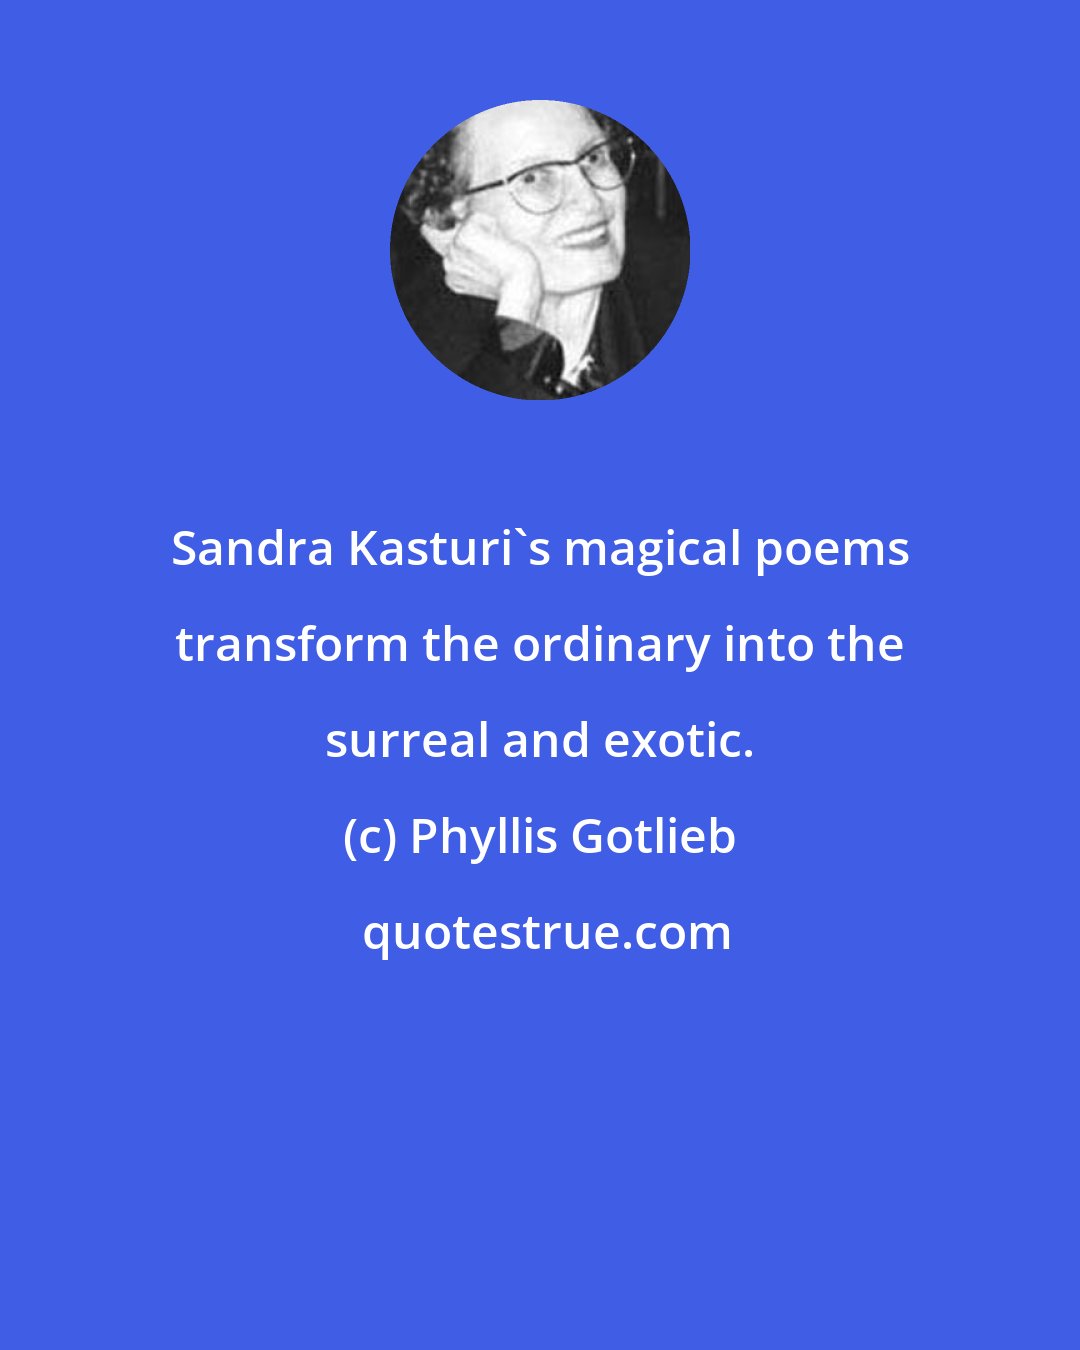 Phyllis Gotlieb: Sandra Kasturi's magical poems transform the ordinary into the surreal and exotic.